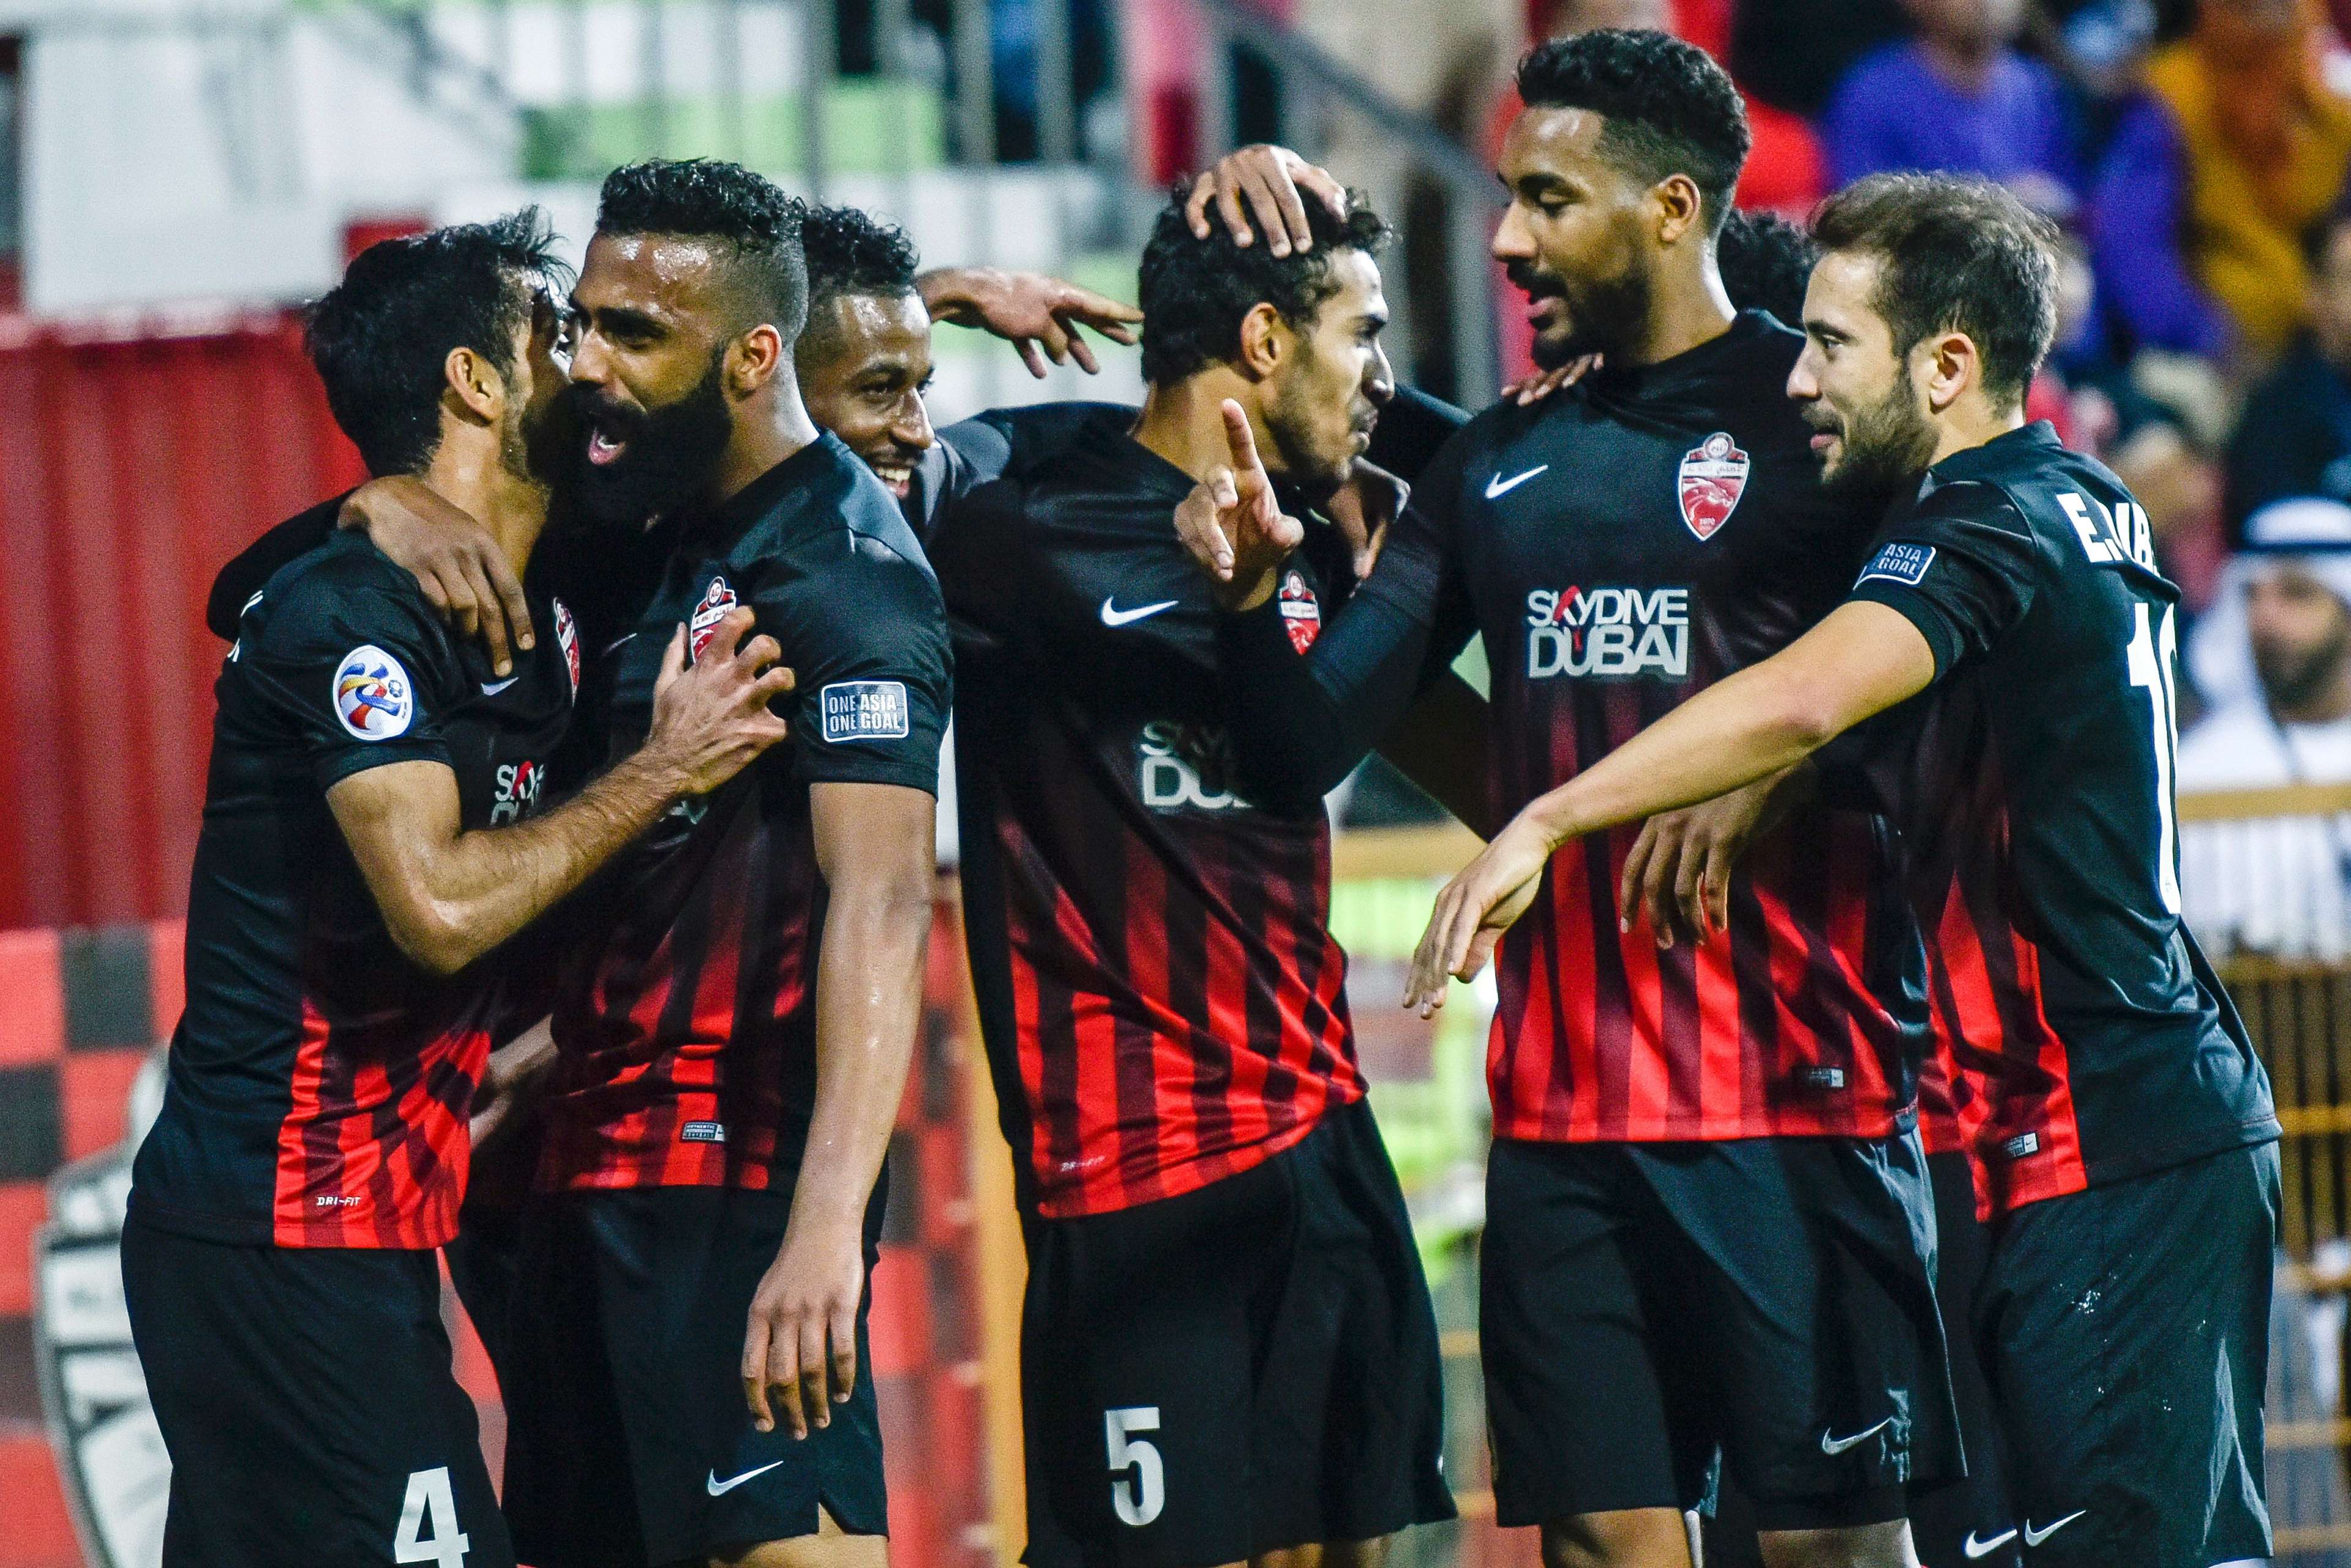 Al-Ahli players celebrate their goal during the AFC Champions League qualifying football match between UAE's Al-Ahli and Iran's Esteghlal FC